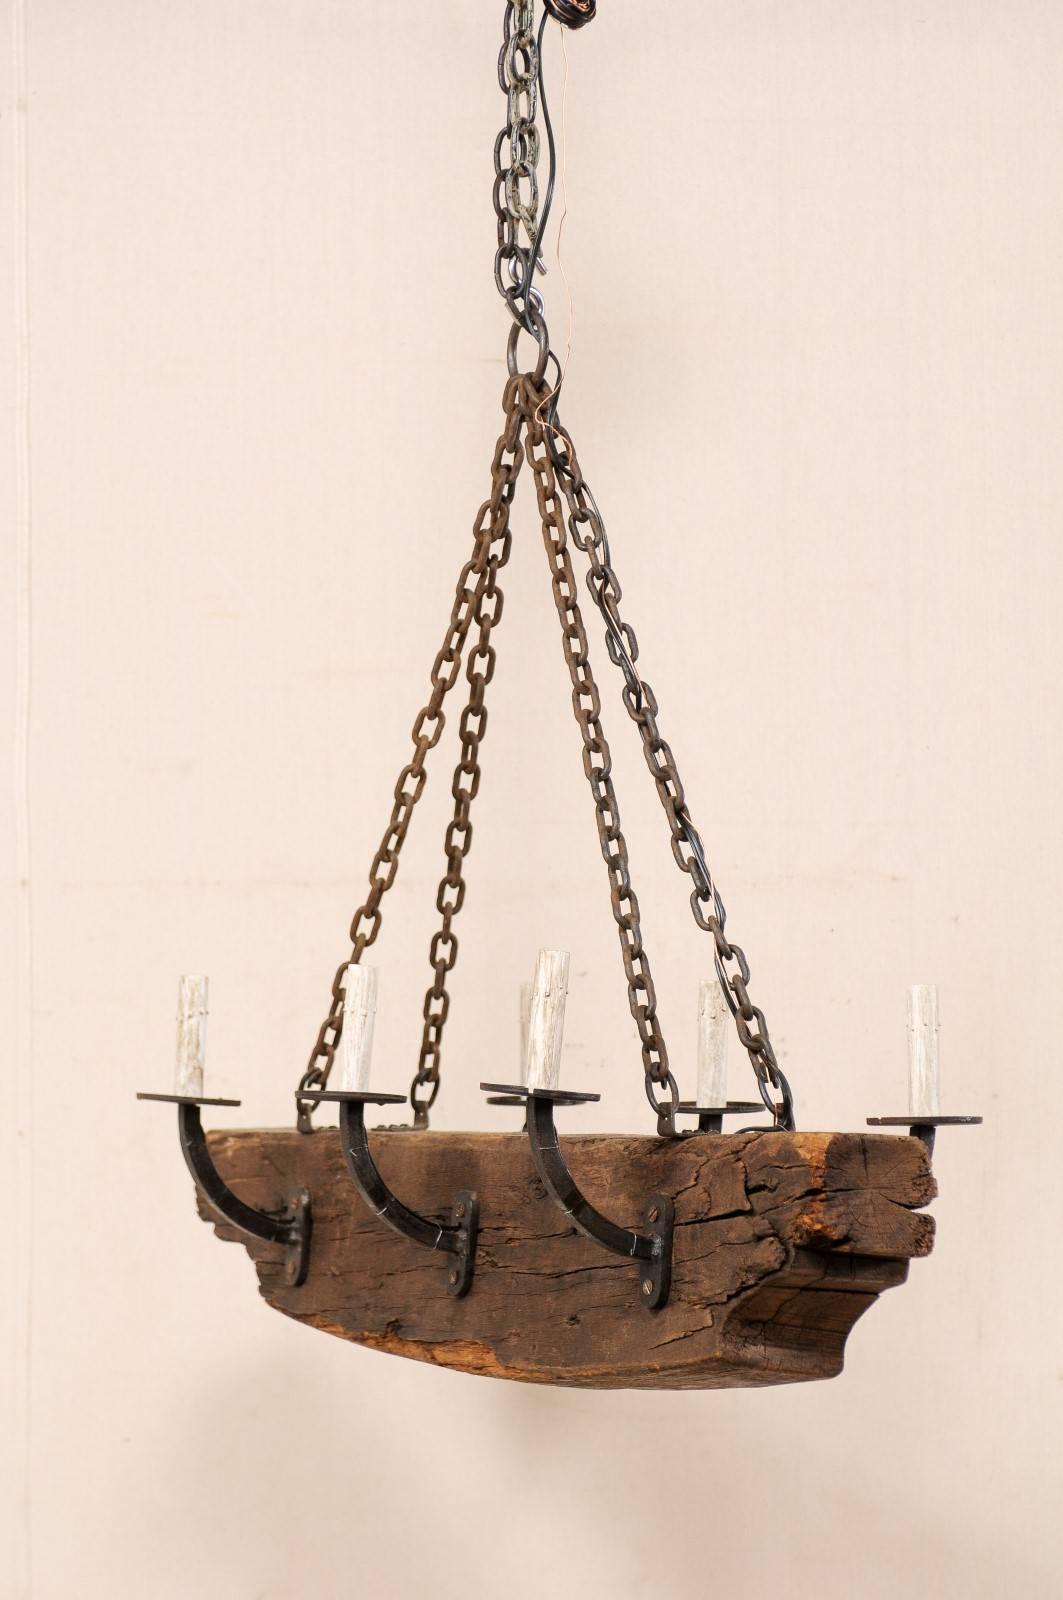 A vintage French six-light rustic beam and metal arms chandelier. This French mid-20th century chandelier has a central wooden beam with six forged iron arms, three at each opposing side. The six arms are simply designed, gently rising up and away